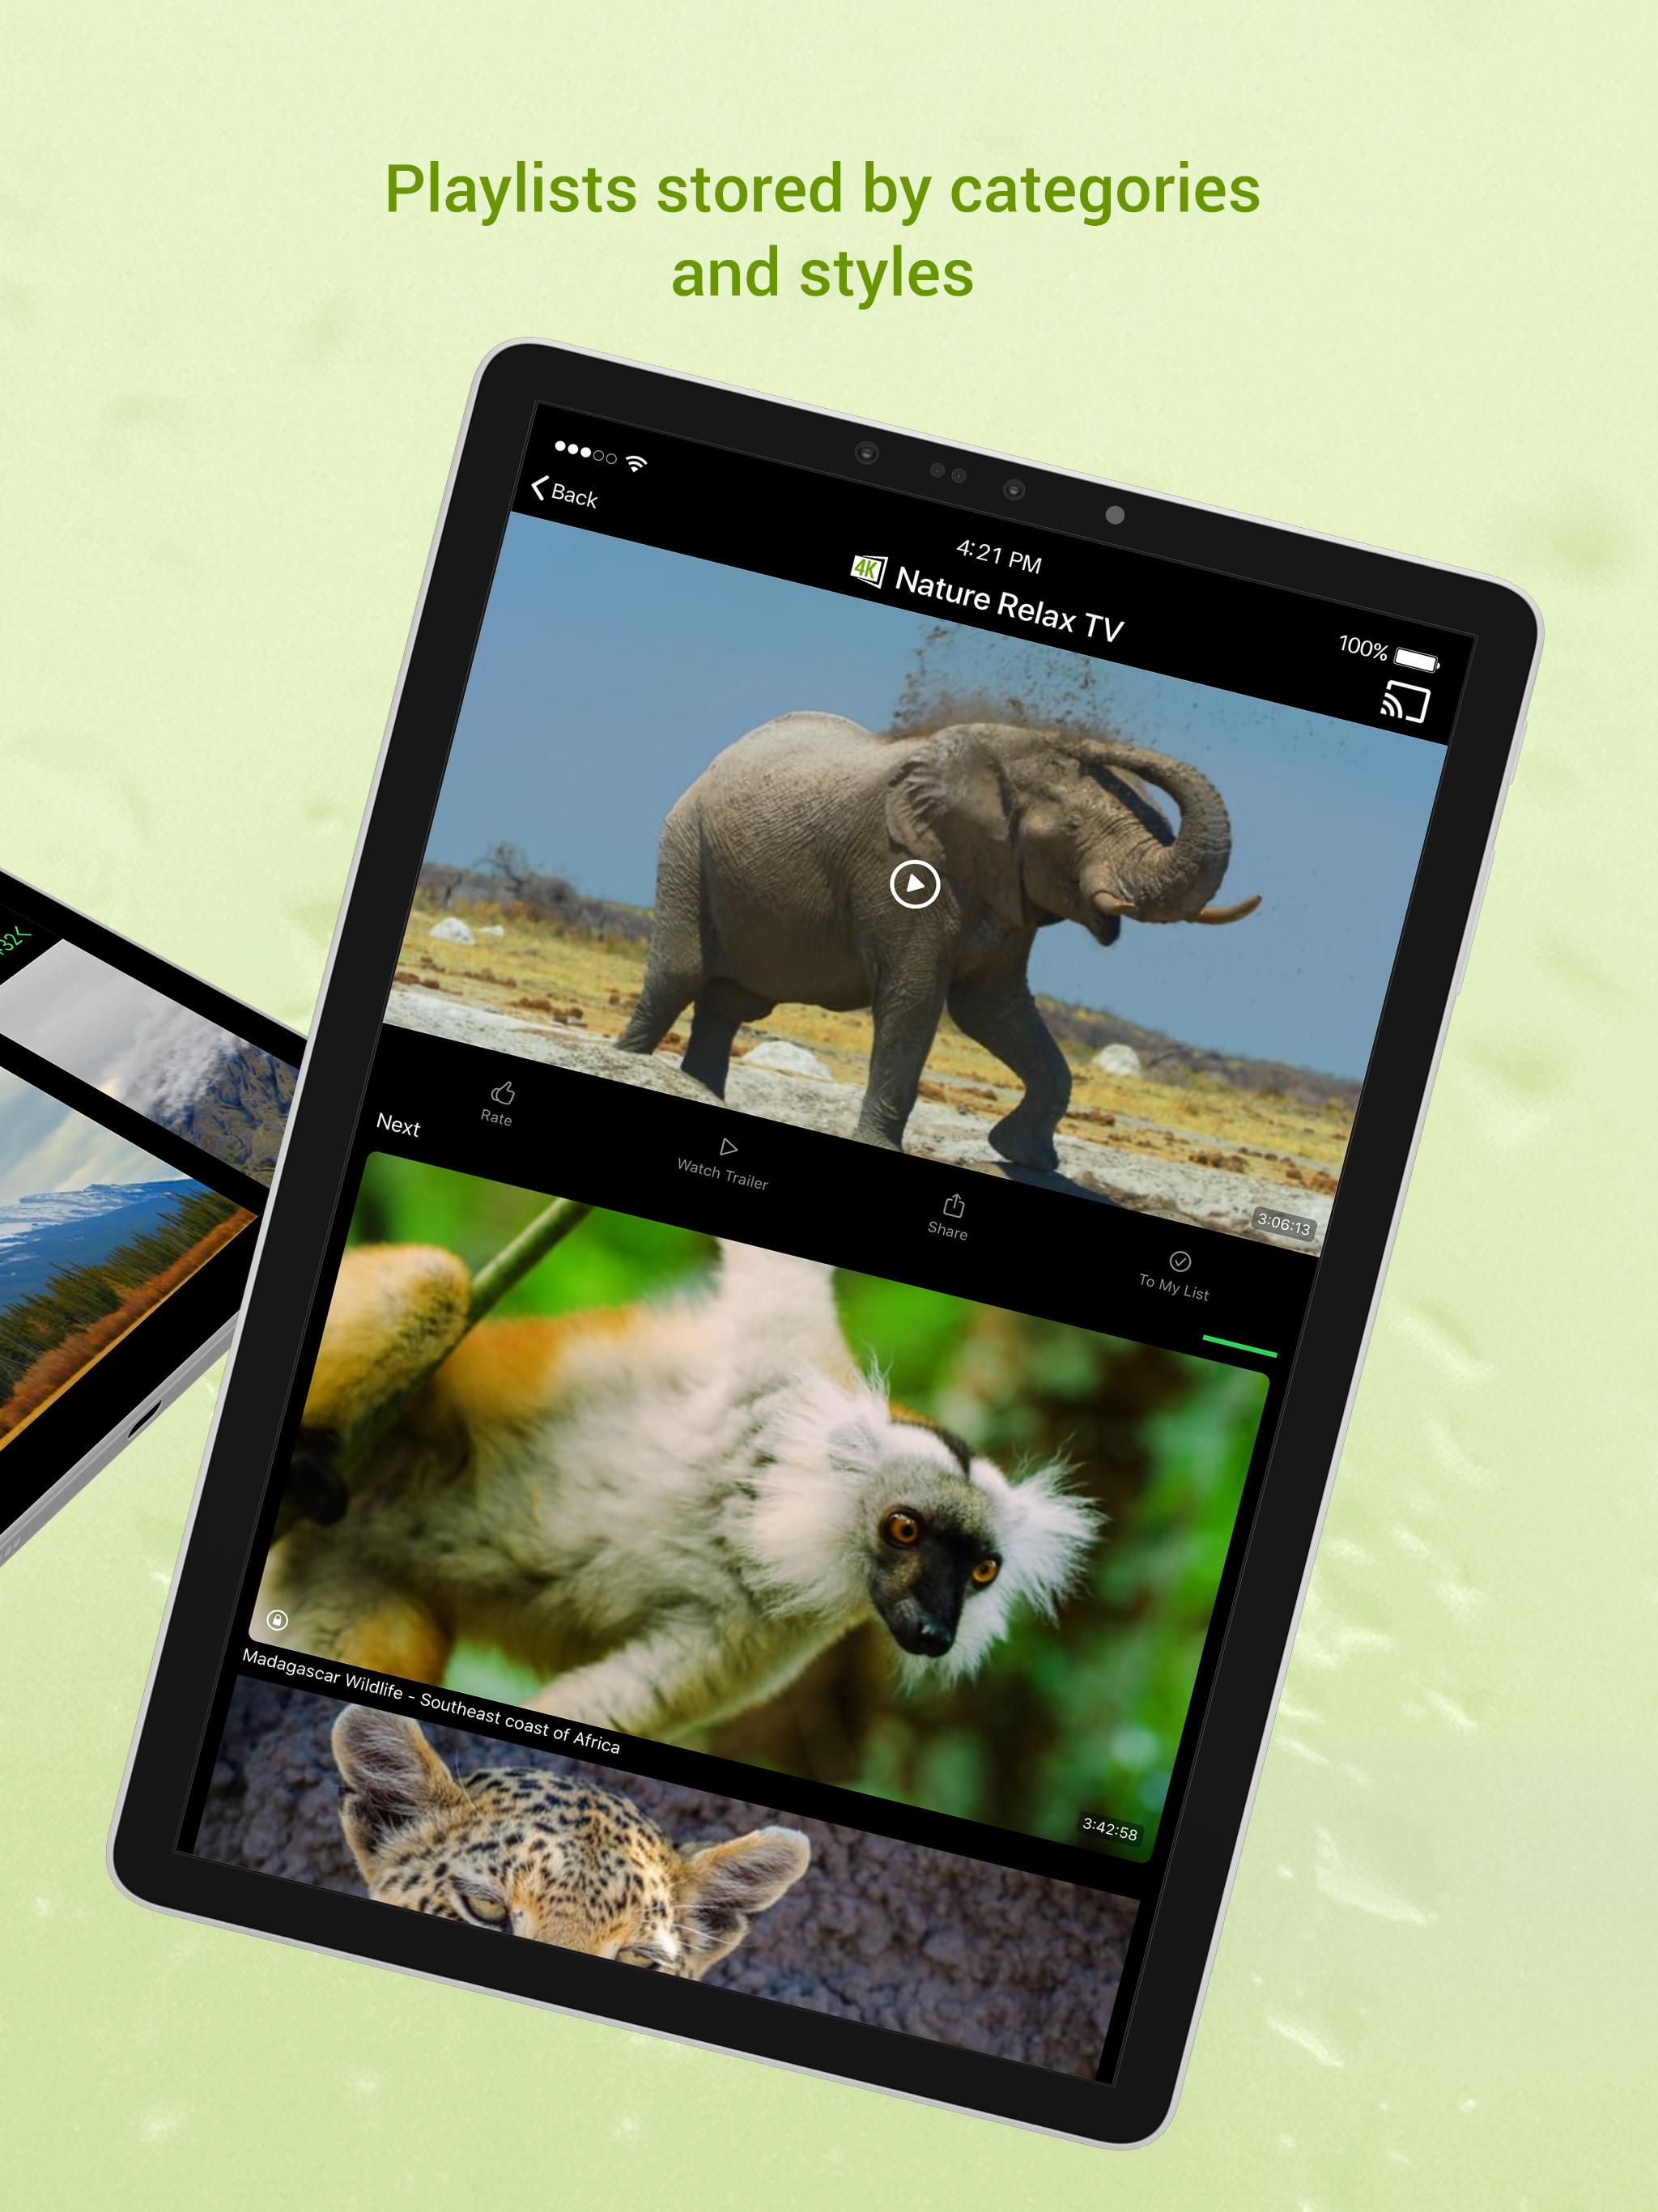 4K Nature Relax TV for Android - APK Download